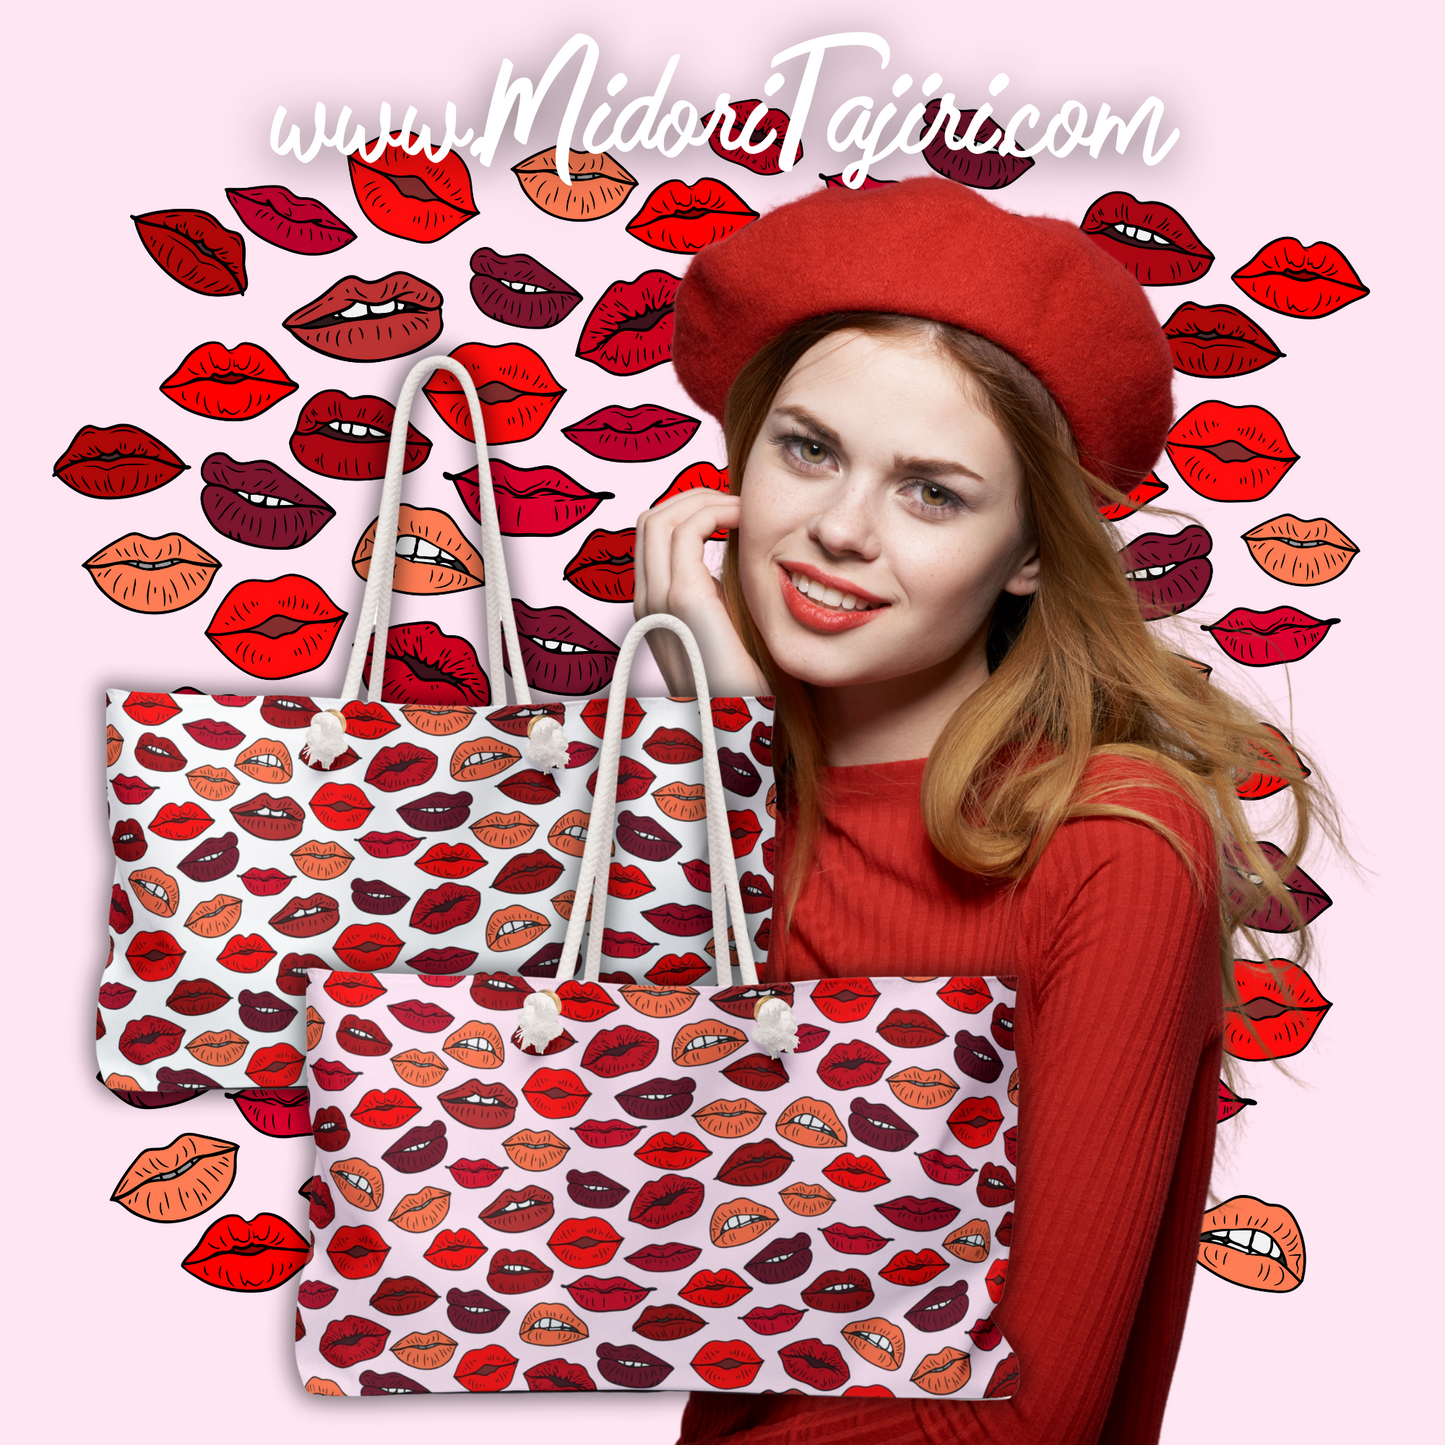 Retro Red Lips Valentine Kiss White Weekender Tote, Holiday Makeup Artist Cosmetics Brush Swag Book Bag, Freelance MUA Cosmetologist Gift